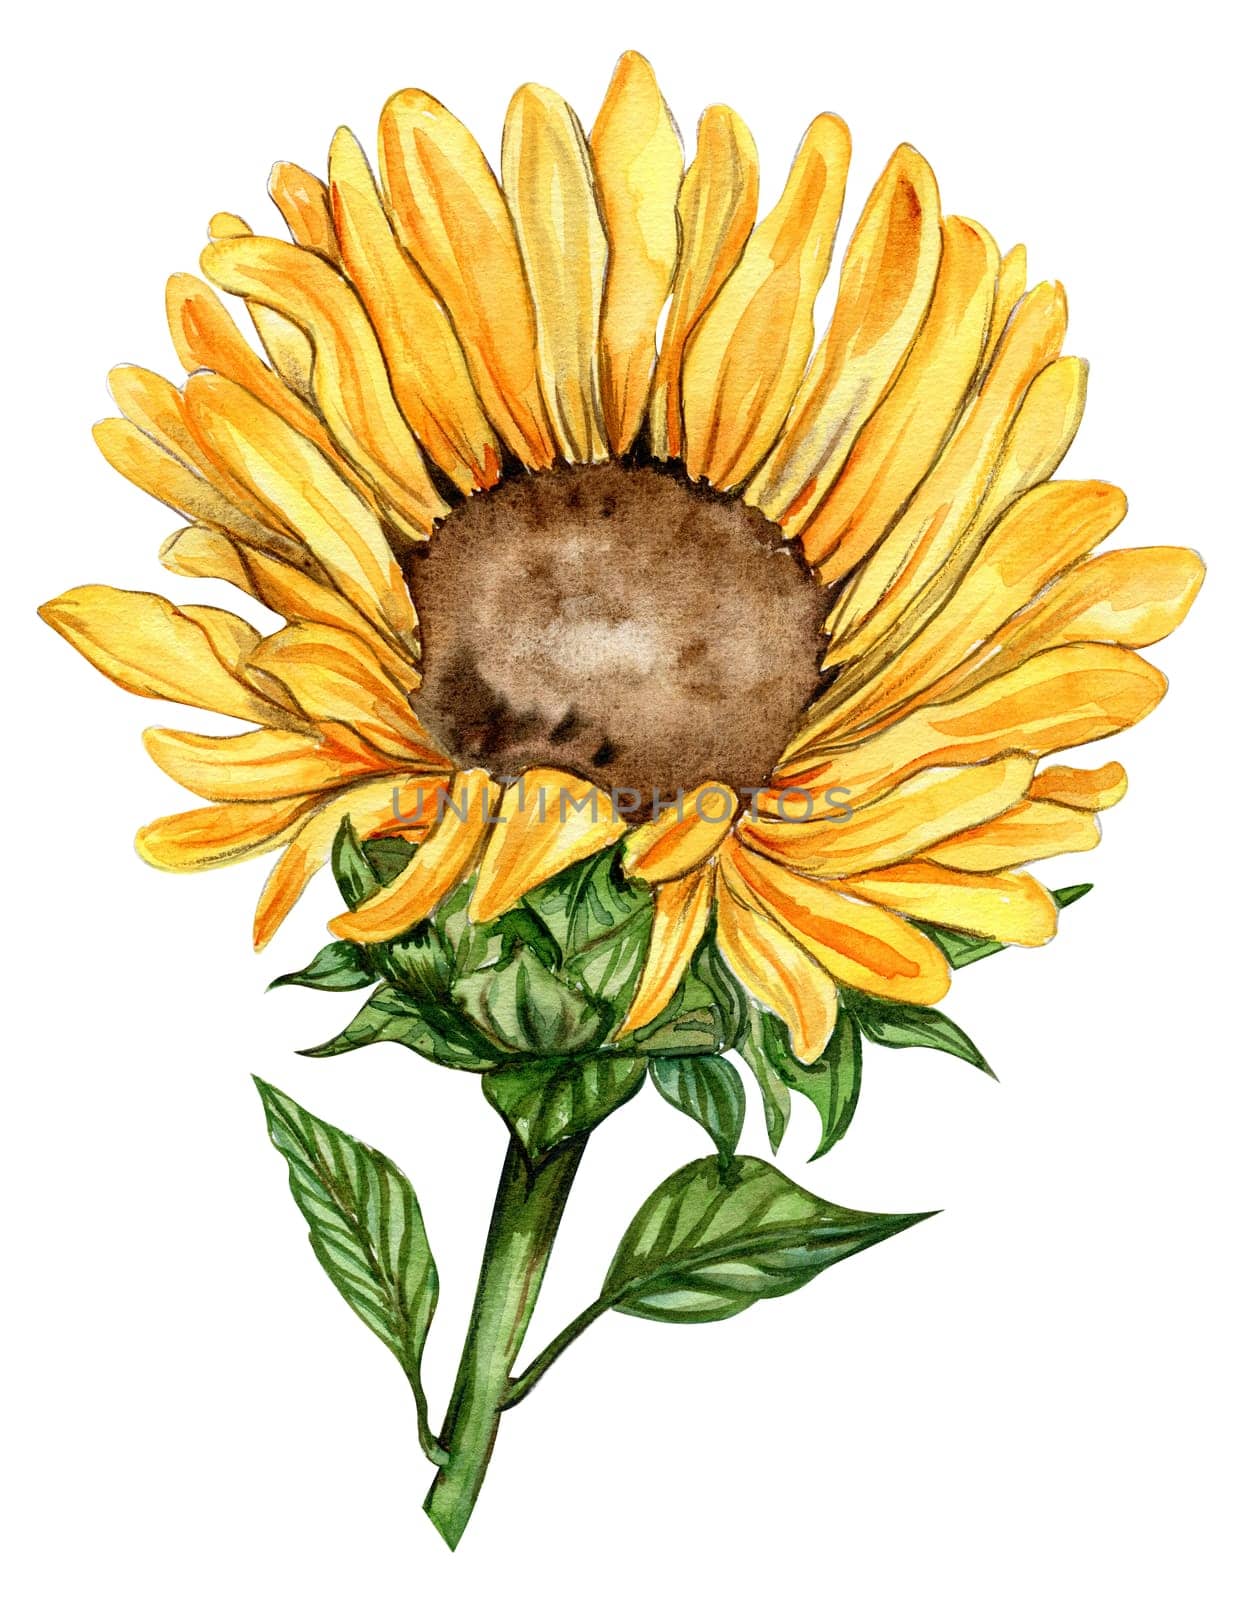 Sunflower, watercolor flower. Hand drawn illustration isolated on white. Summer yellow garden. Designf for baby shower party, birthday, cake, holiday celebration design, greetings card,invitation.